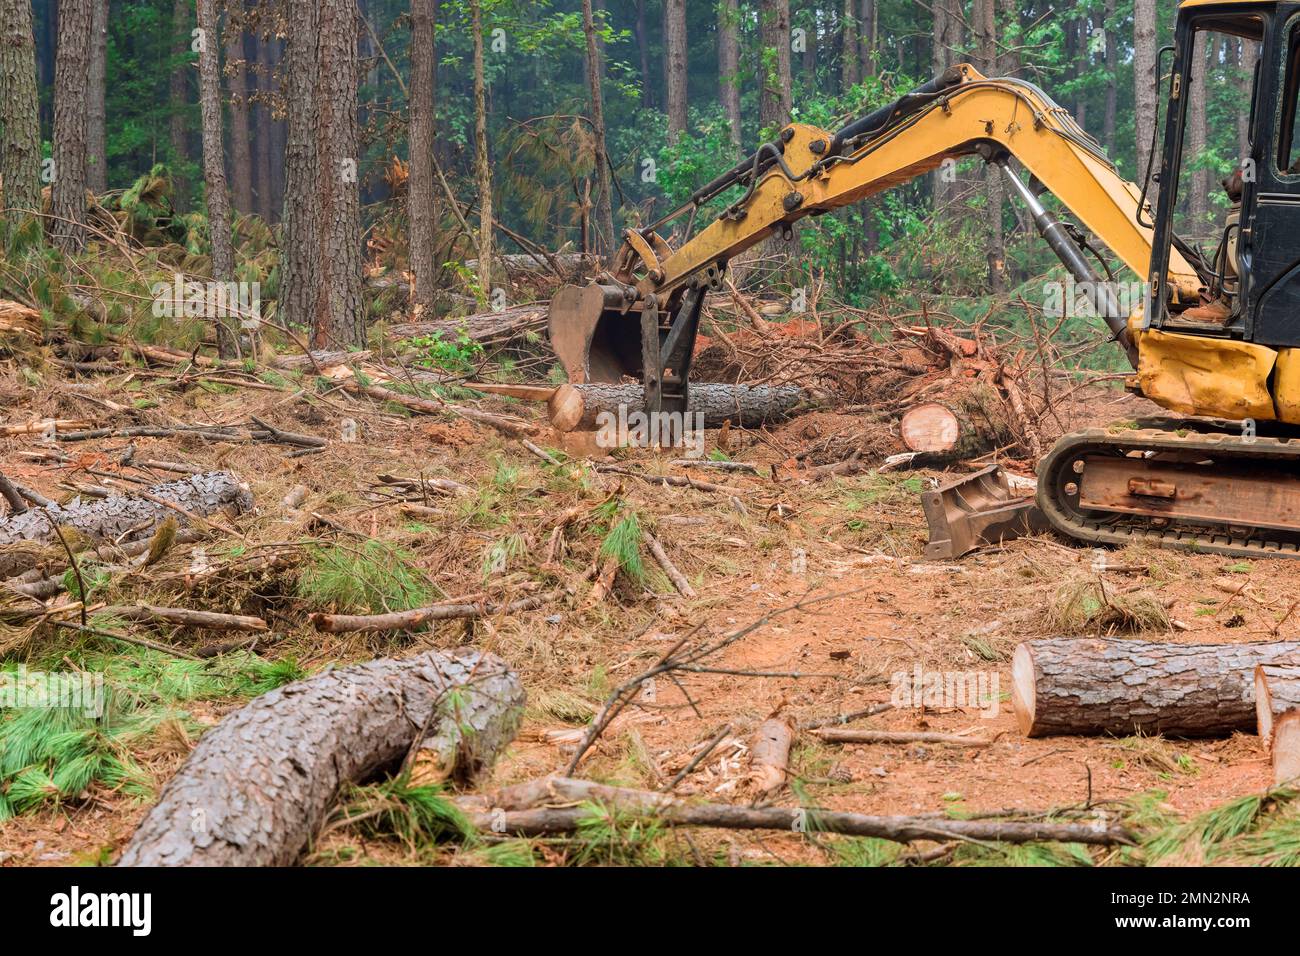 Work tractor manipulator uproot trees with aim lifting logs to prepare land for construction of new housing being done order carry out deforestation work Stock Photo